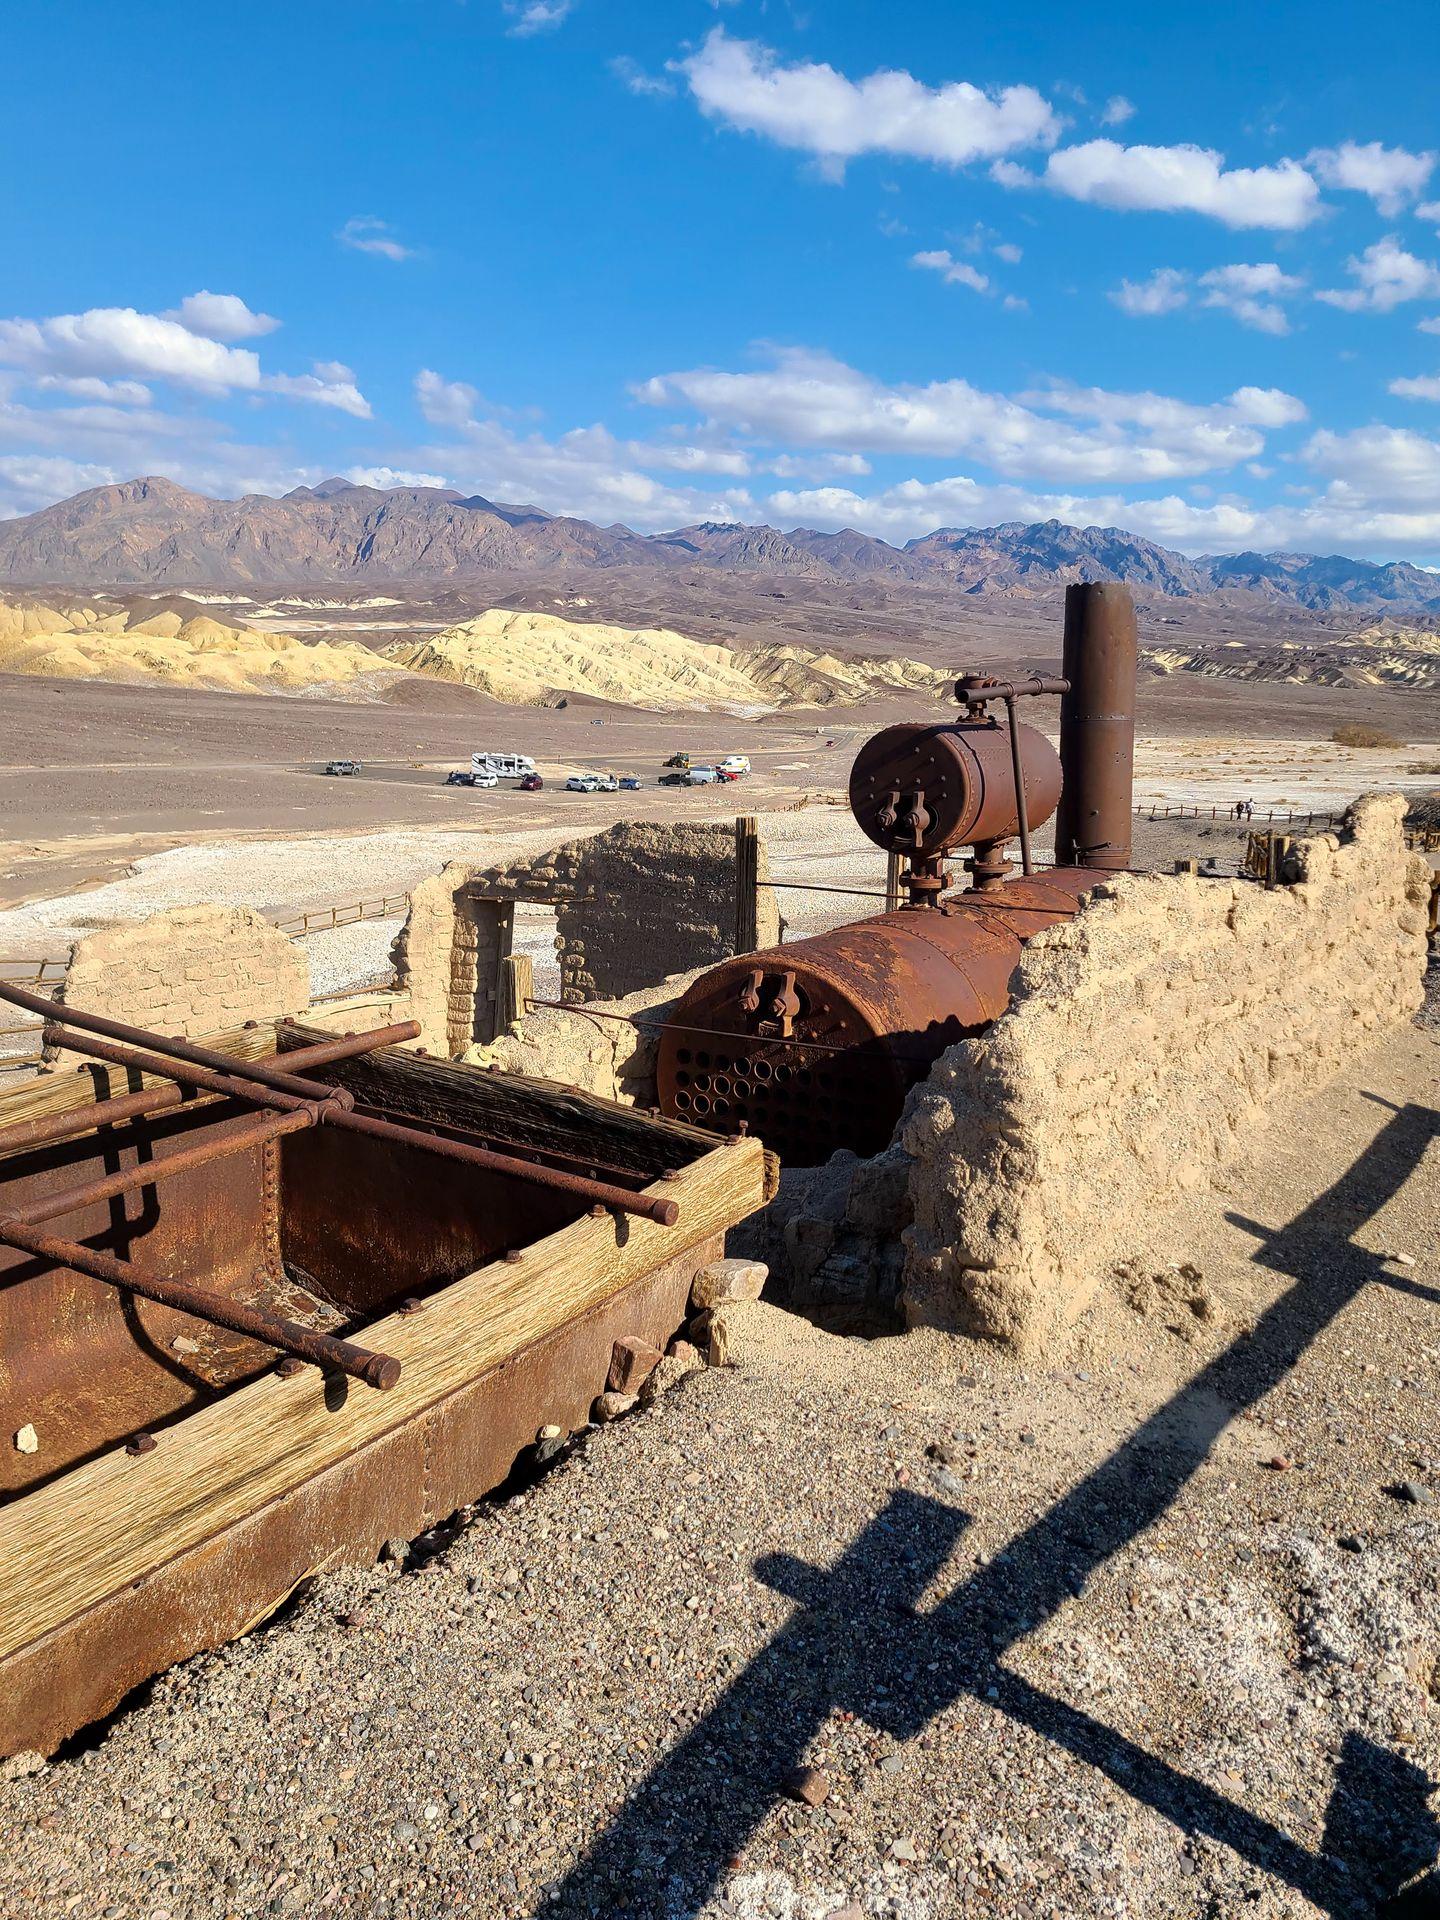 Former equipment used in Borax mining in Death Valley